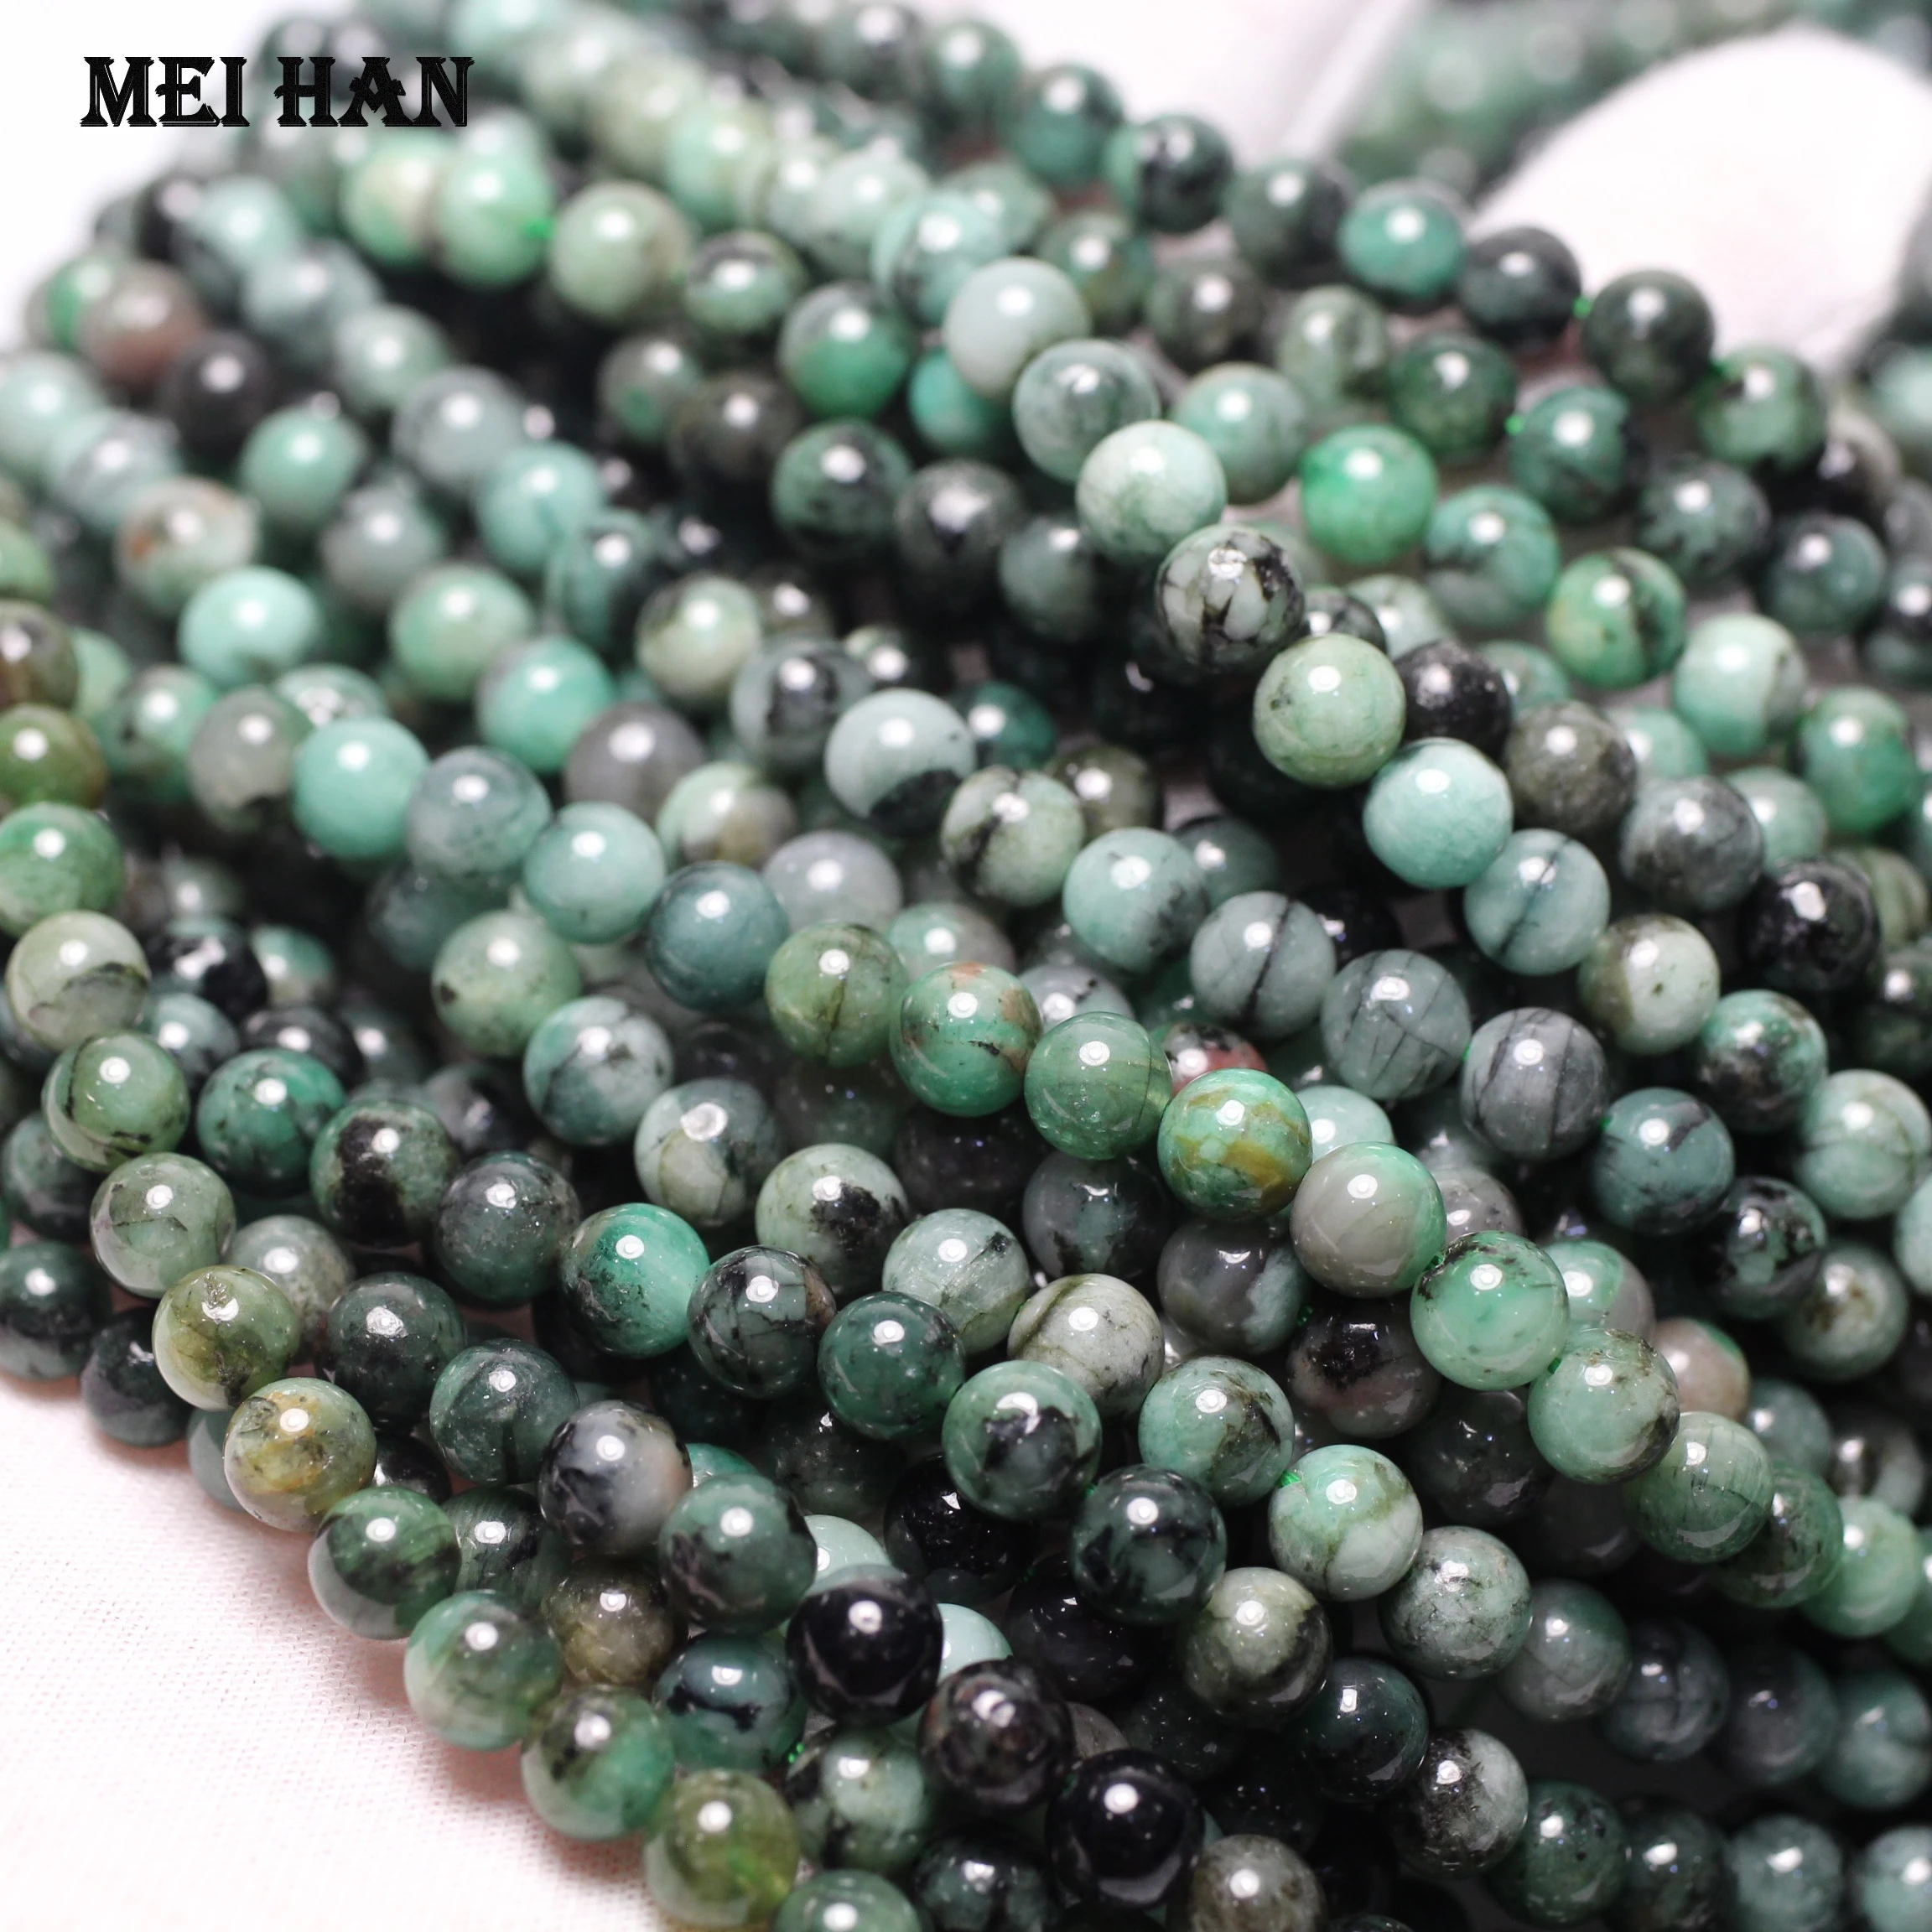 Natural genuine 5-6mm African Emerald semi-precious gemstone smooth round loose beads stone for jewelry making design